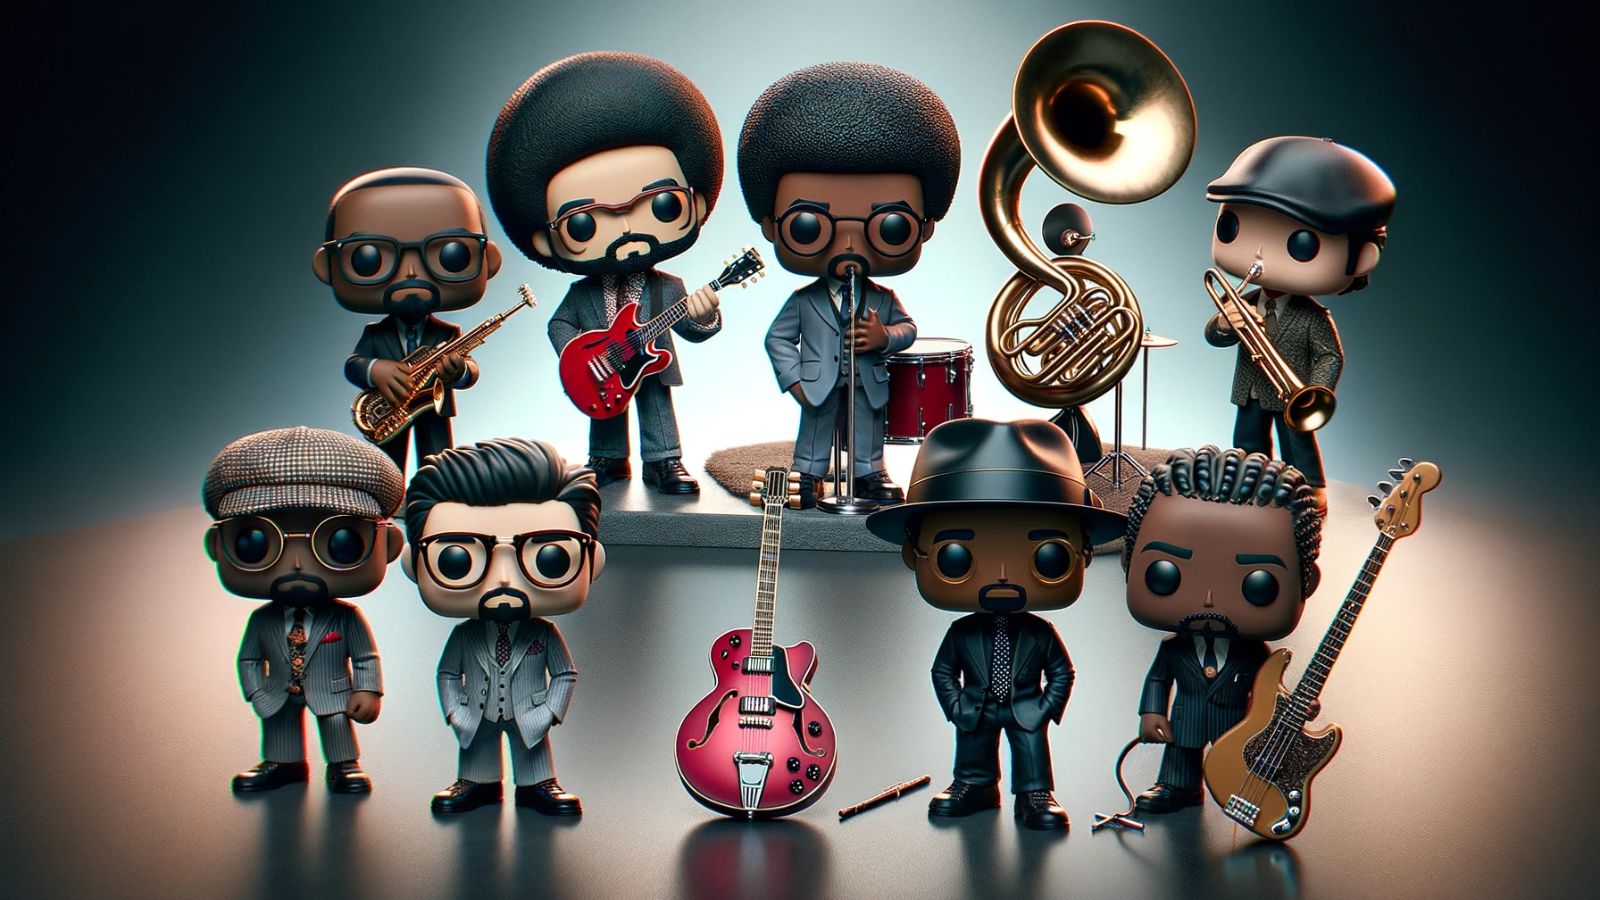 The Roots Band: From Underground to Spotlight